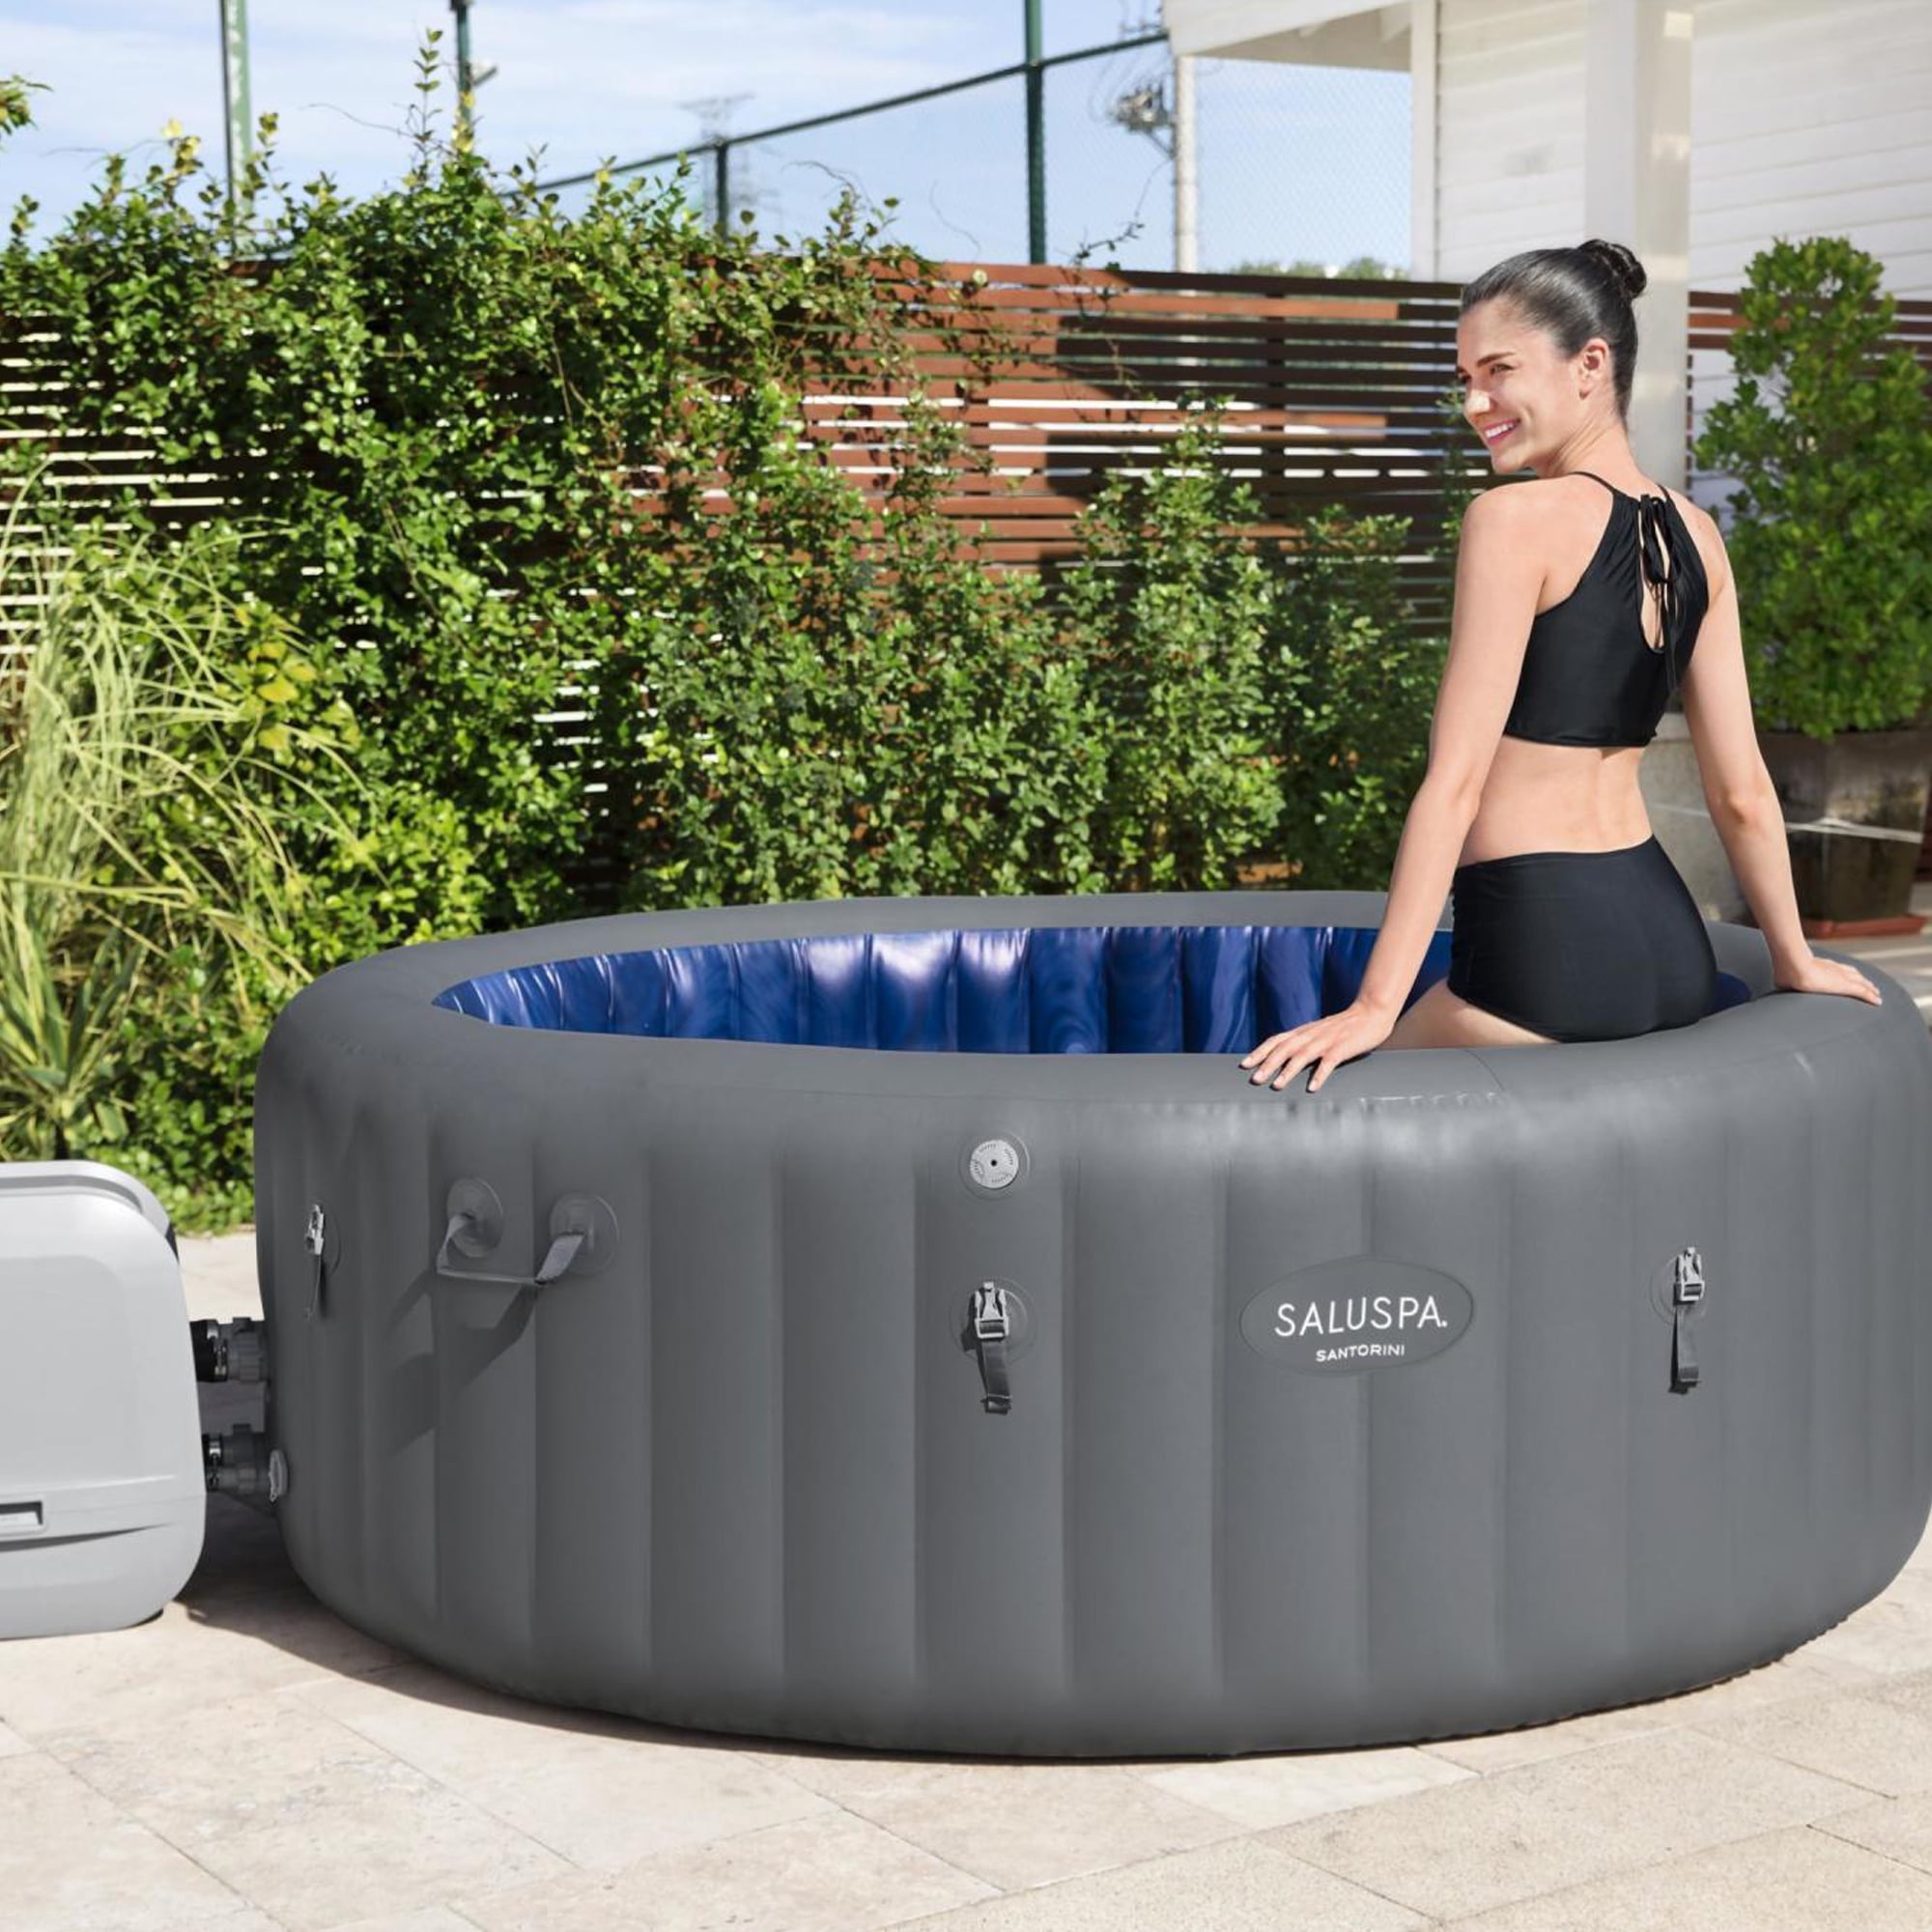 SaluSpa Hot Santorini 180 Tub HydroJet Gray with Bestway Jets, Inflatable